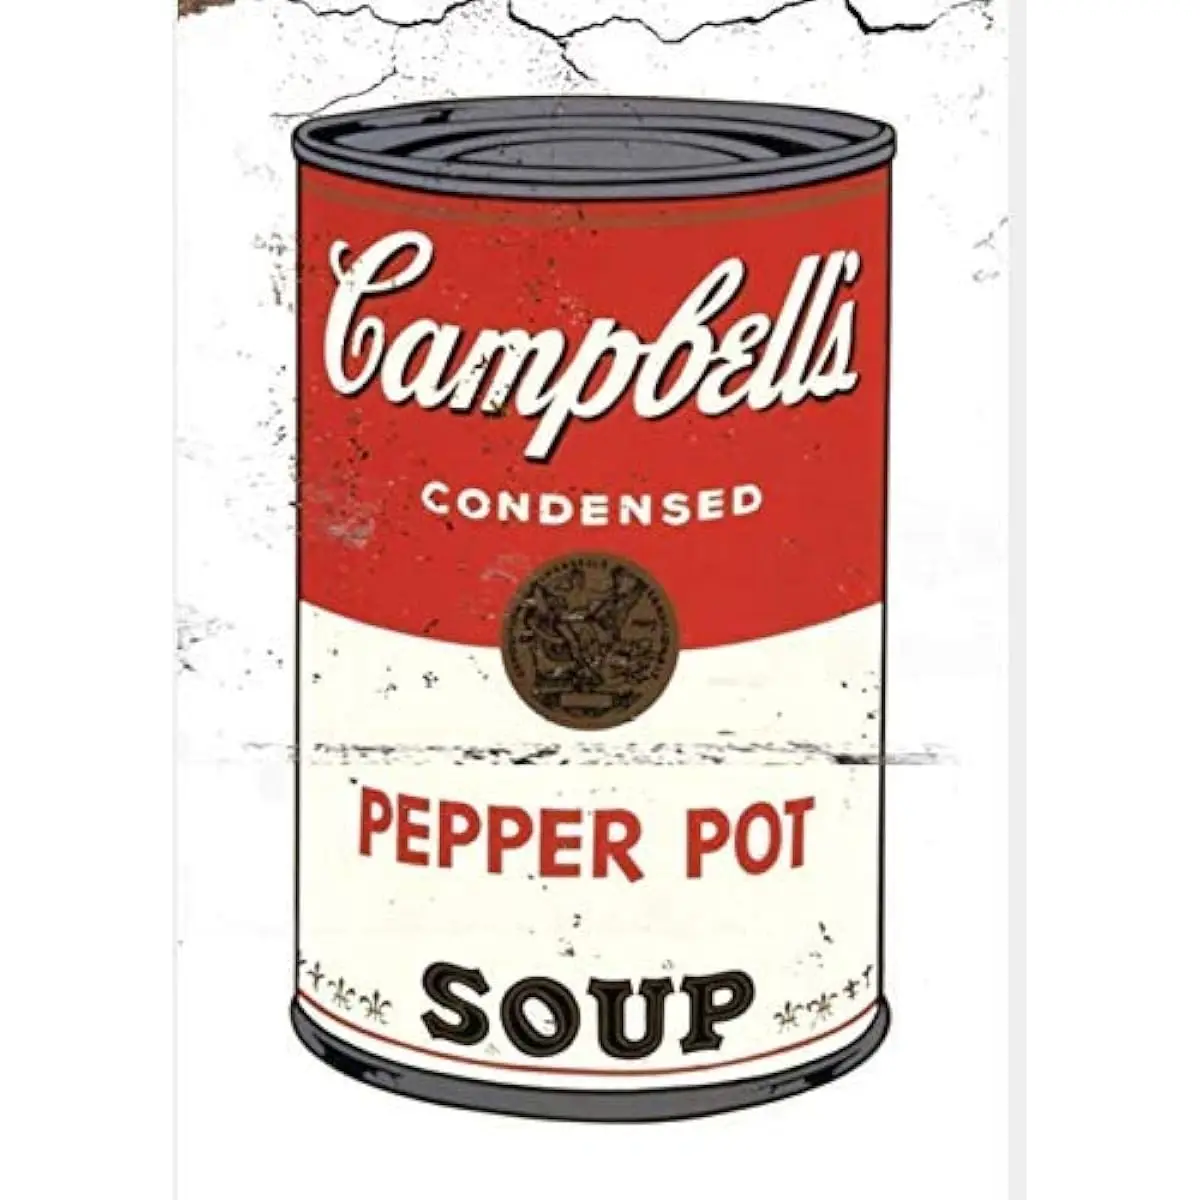 

Metal Sign Metal Sign Andy Warhol Poster Campbell's Condensed Pepper Pot Soup Rusted Vintage Tin Sign 8x12 Inches